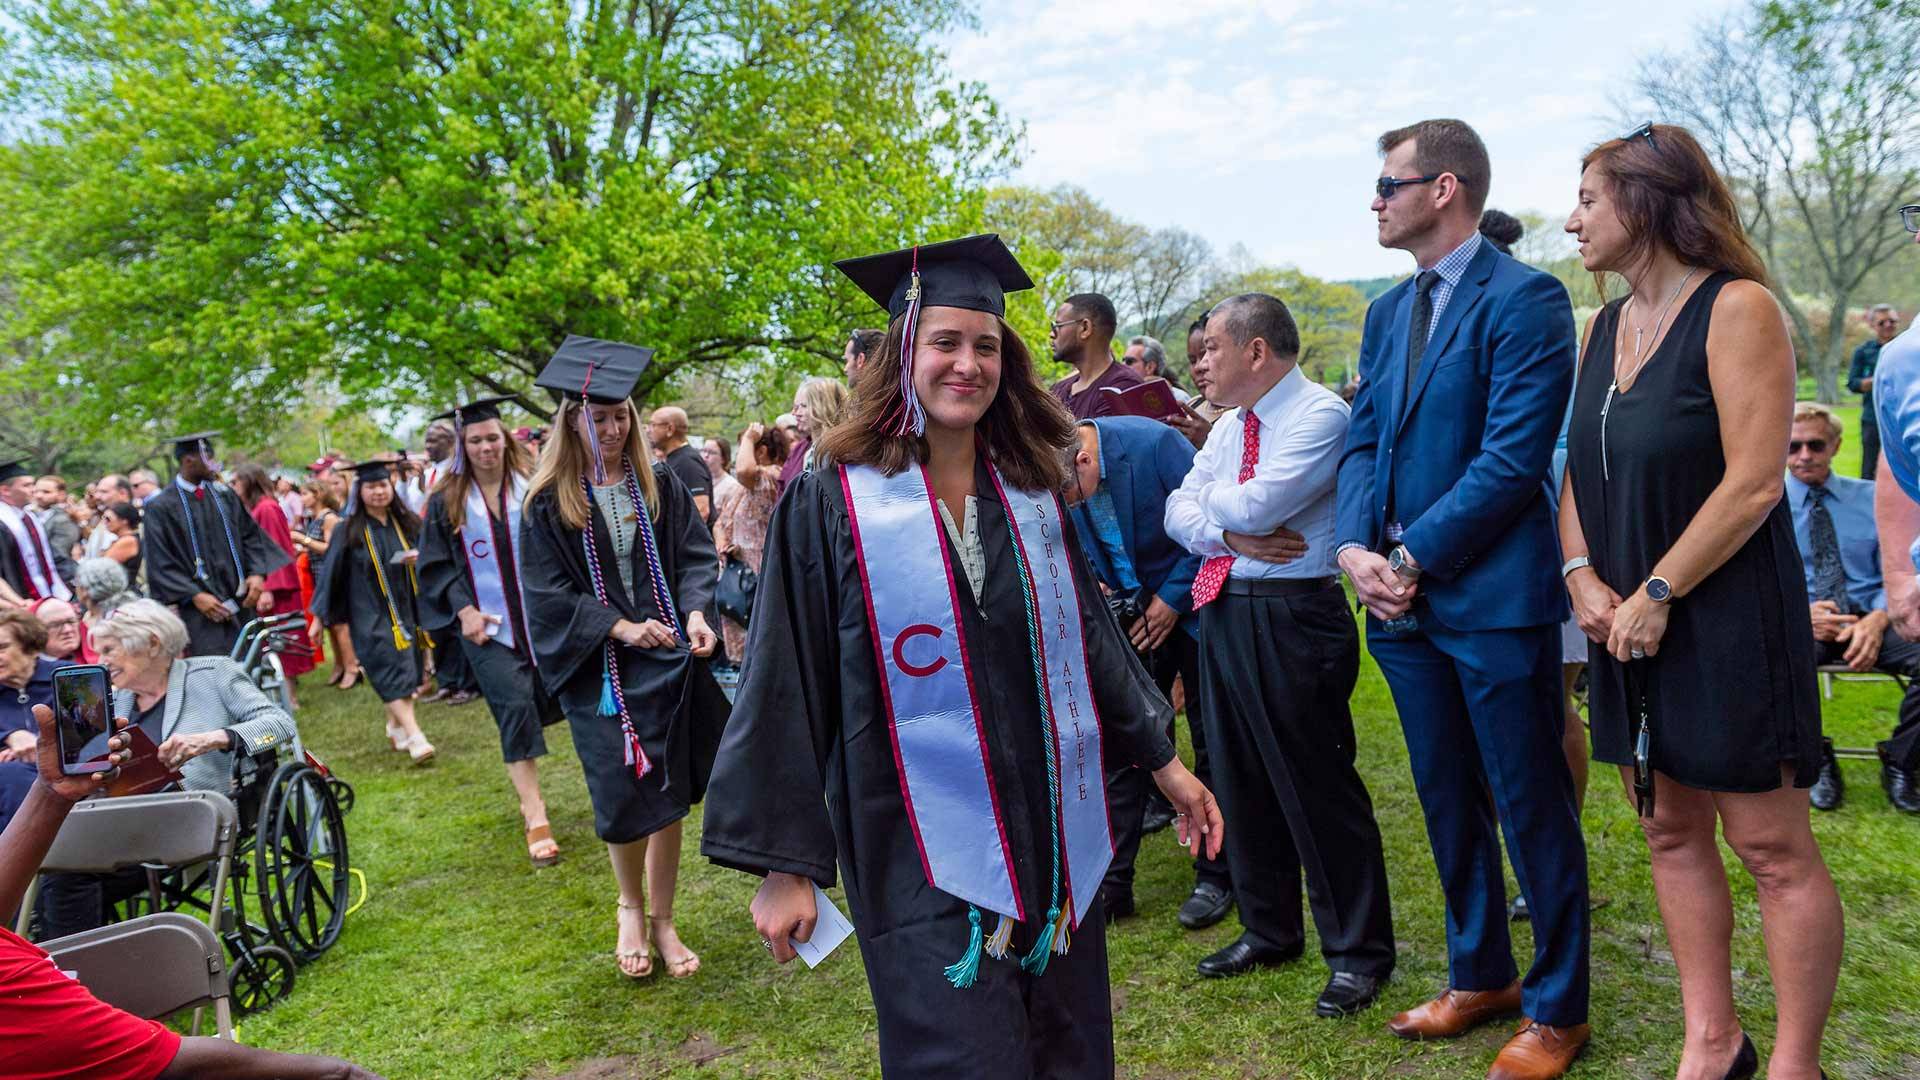 Students in caps and gowns walk for commencement